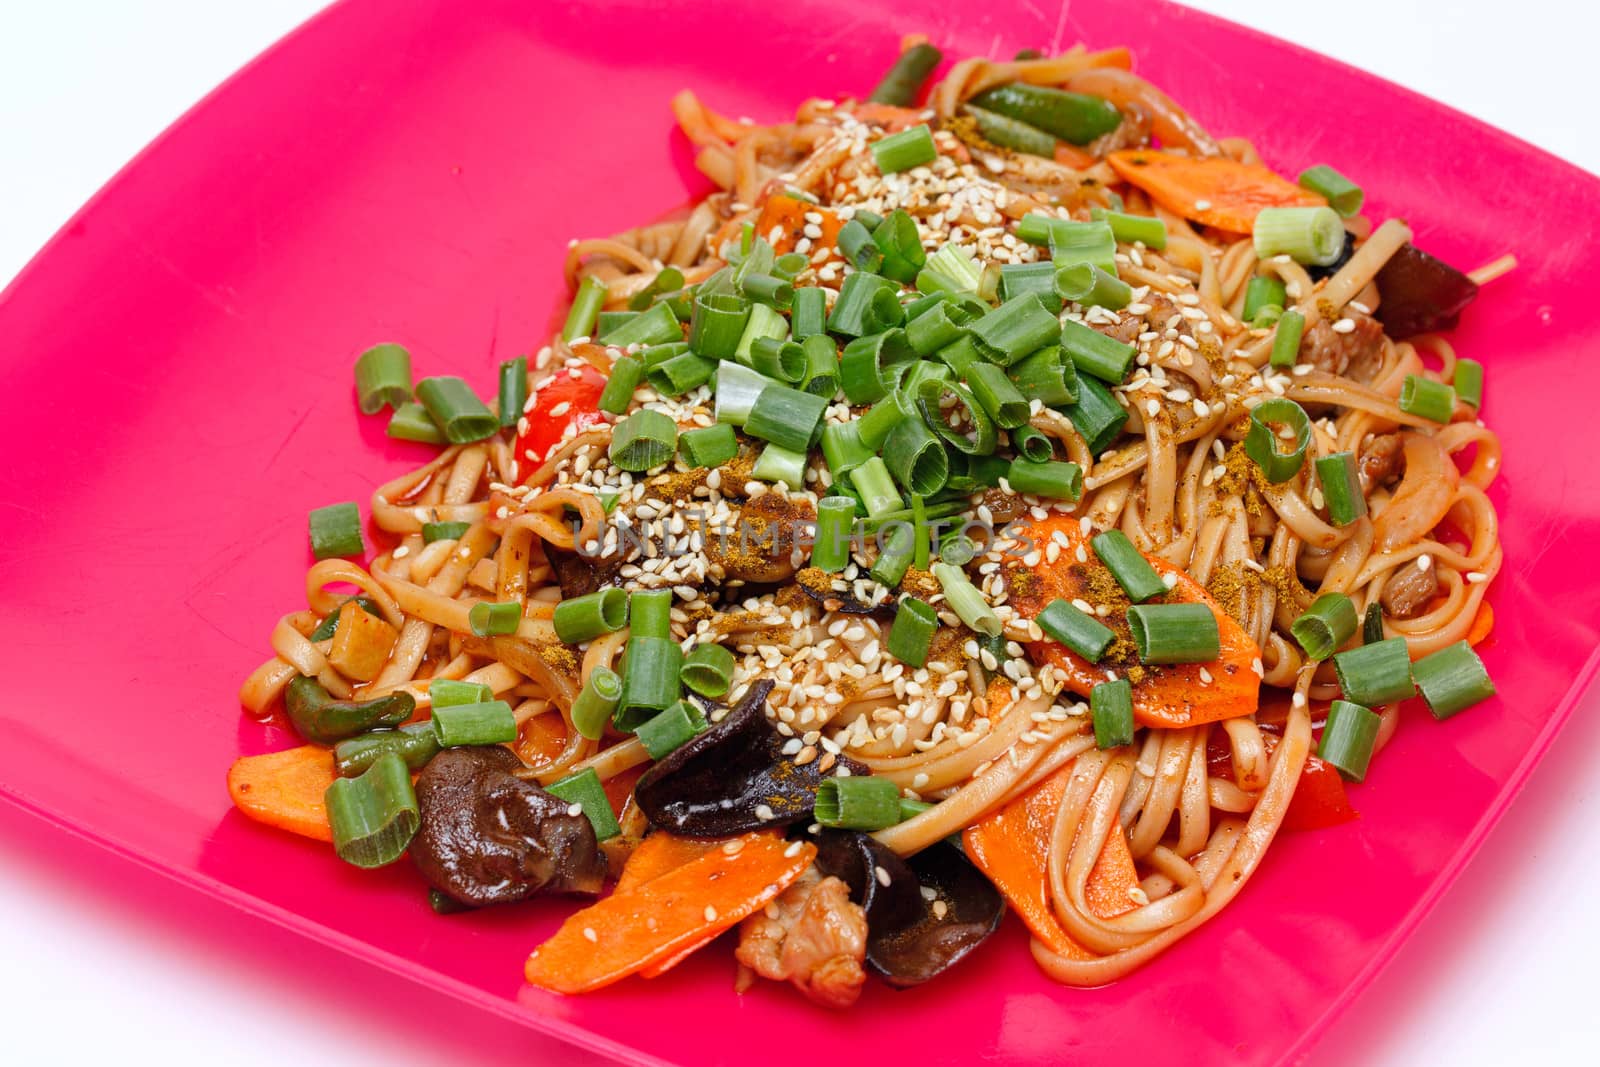 Tasty Noodles with Vegetables Cooked in Wok